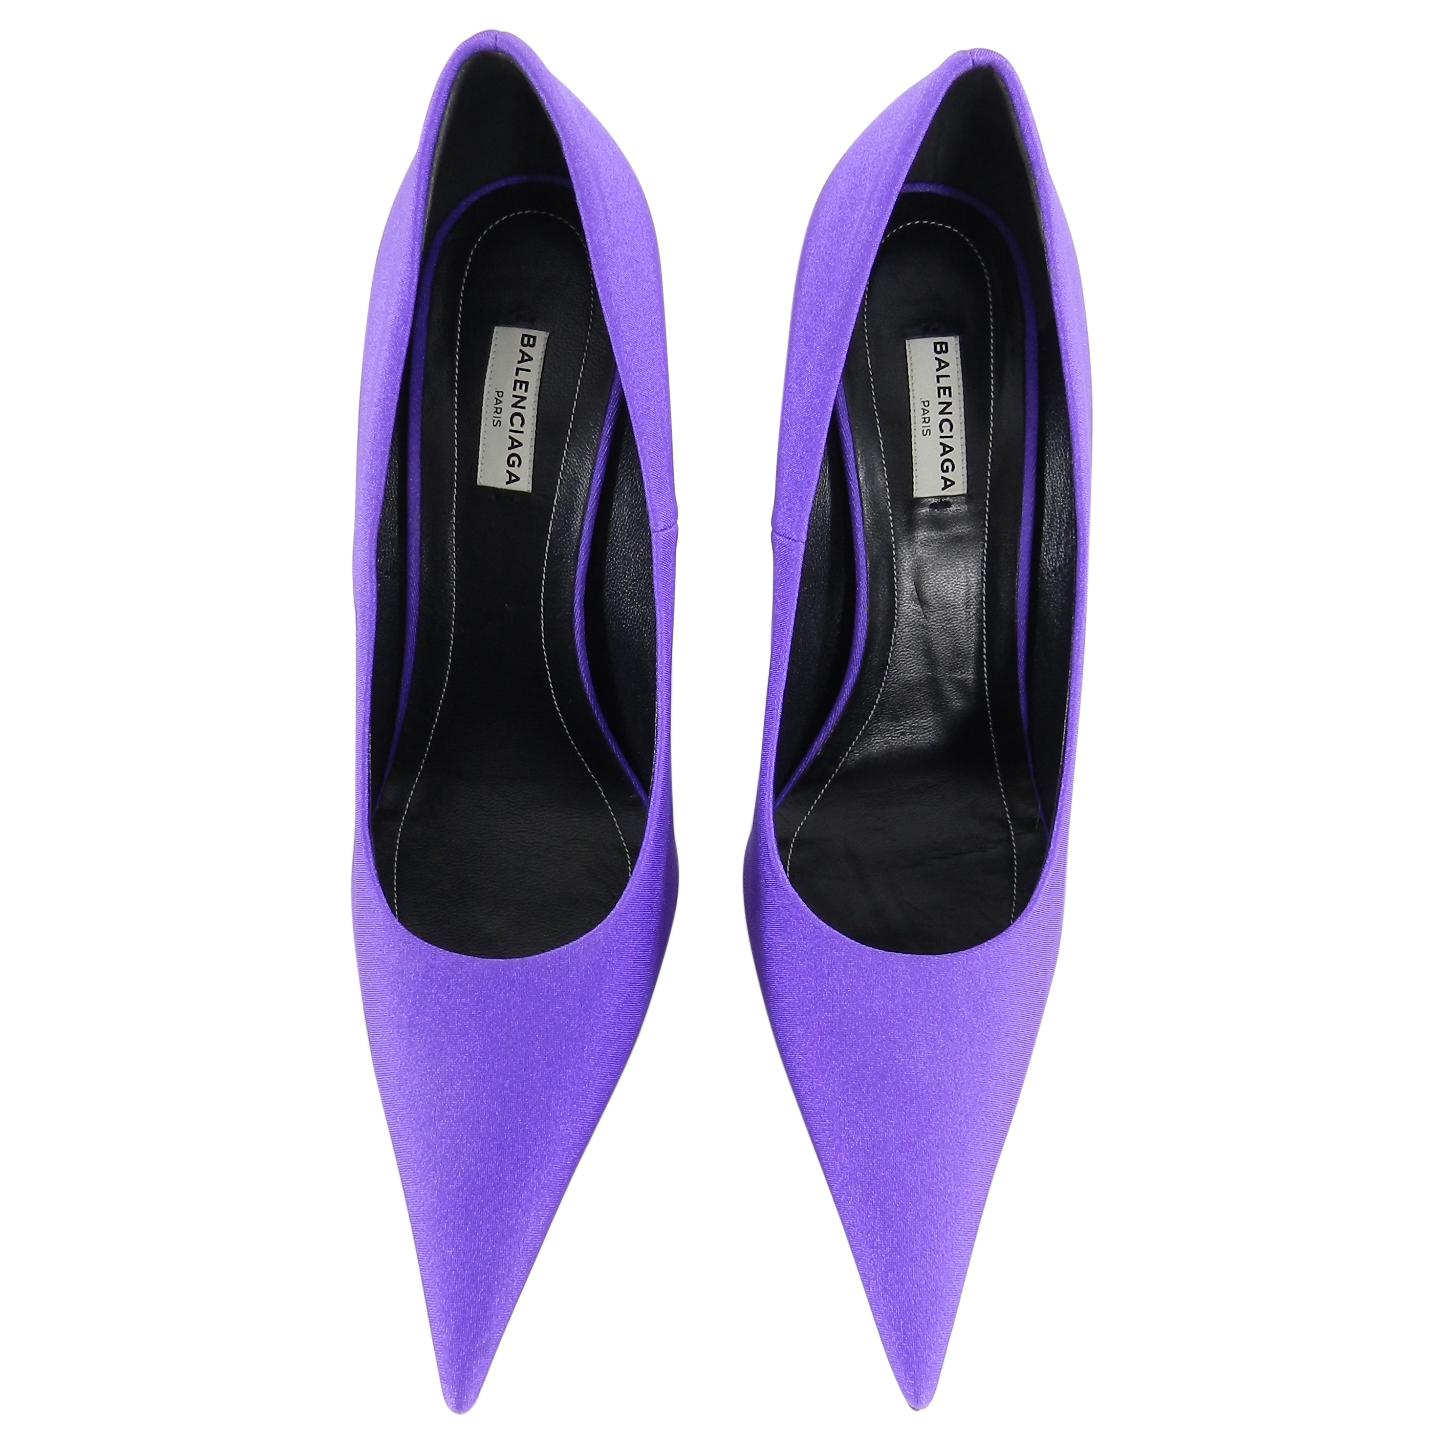 Balenciaga Purple Satin Spandex Knife Pumps.  Pointed toe, 115mm heel. Marked size 40. Brand new unworn.  Duster and box not included. Original purchase receipt is available upon request.